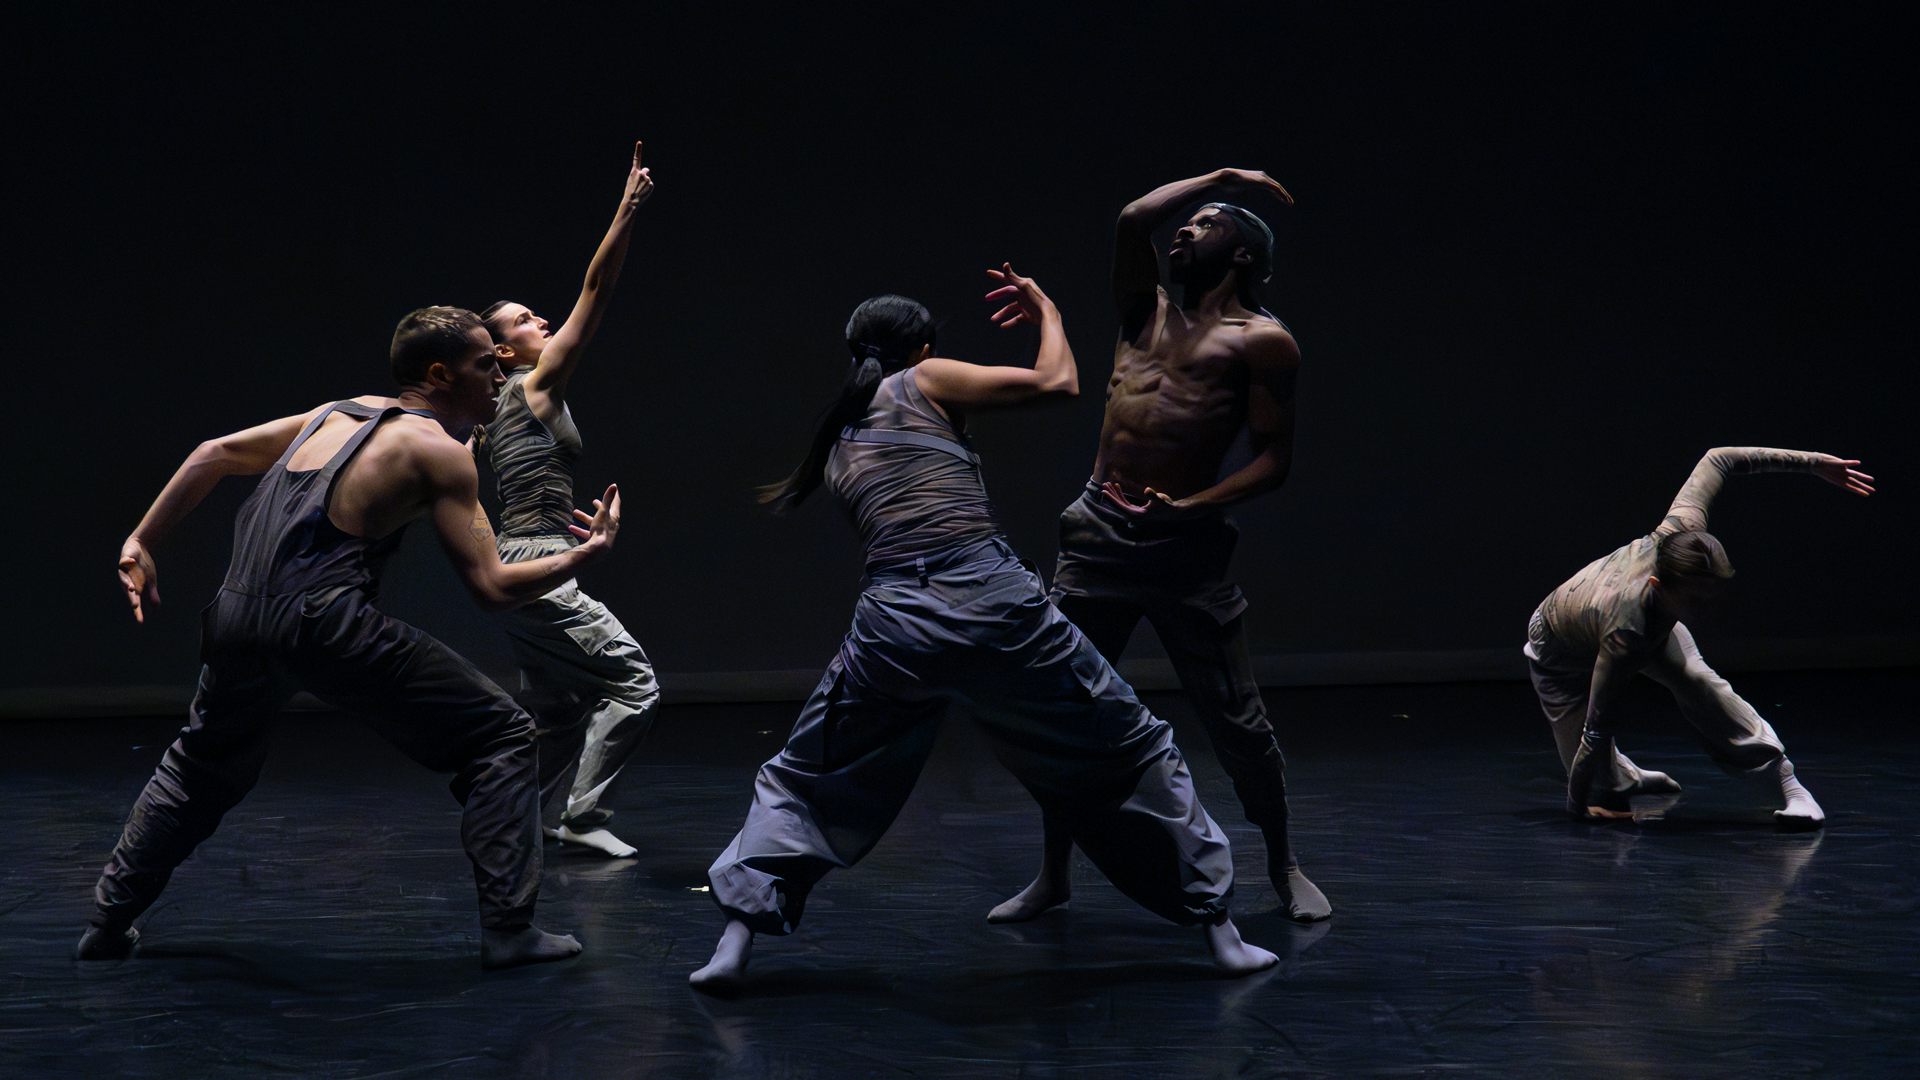 Five dancers in dark clothes stretch their arms out while facing each other against a black background